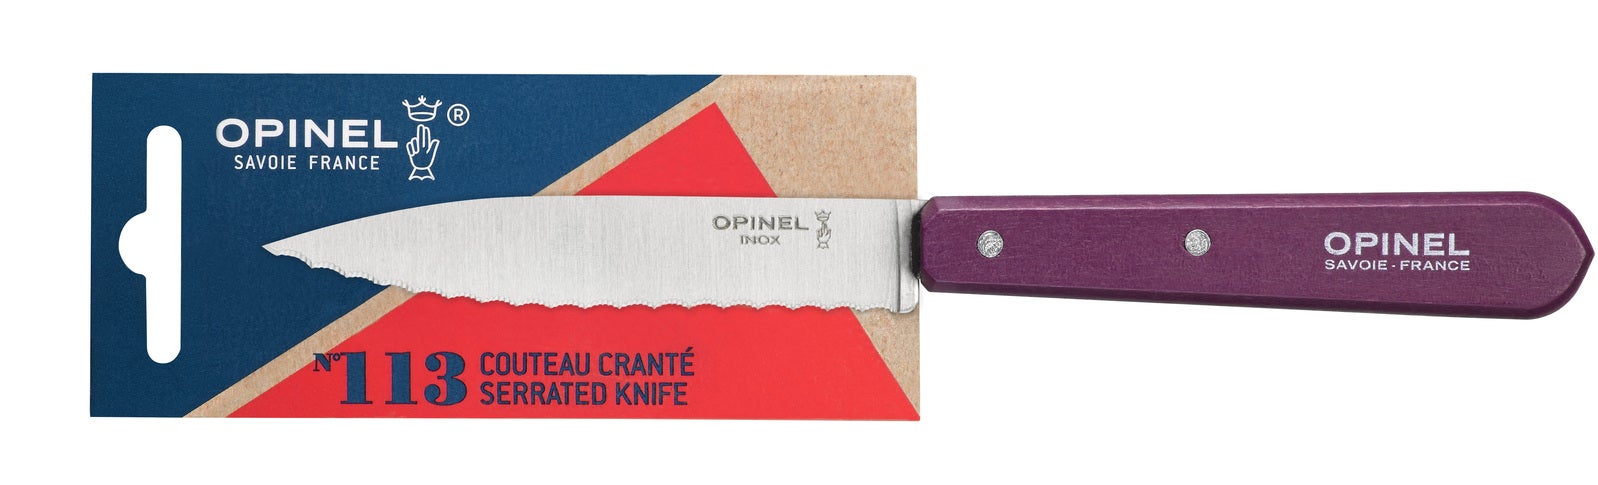 Opinel 001919 - 10cm Stainless Steel Serrated Paring Knife (Plum Handles)